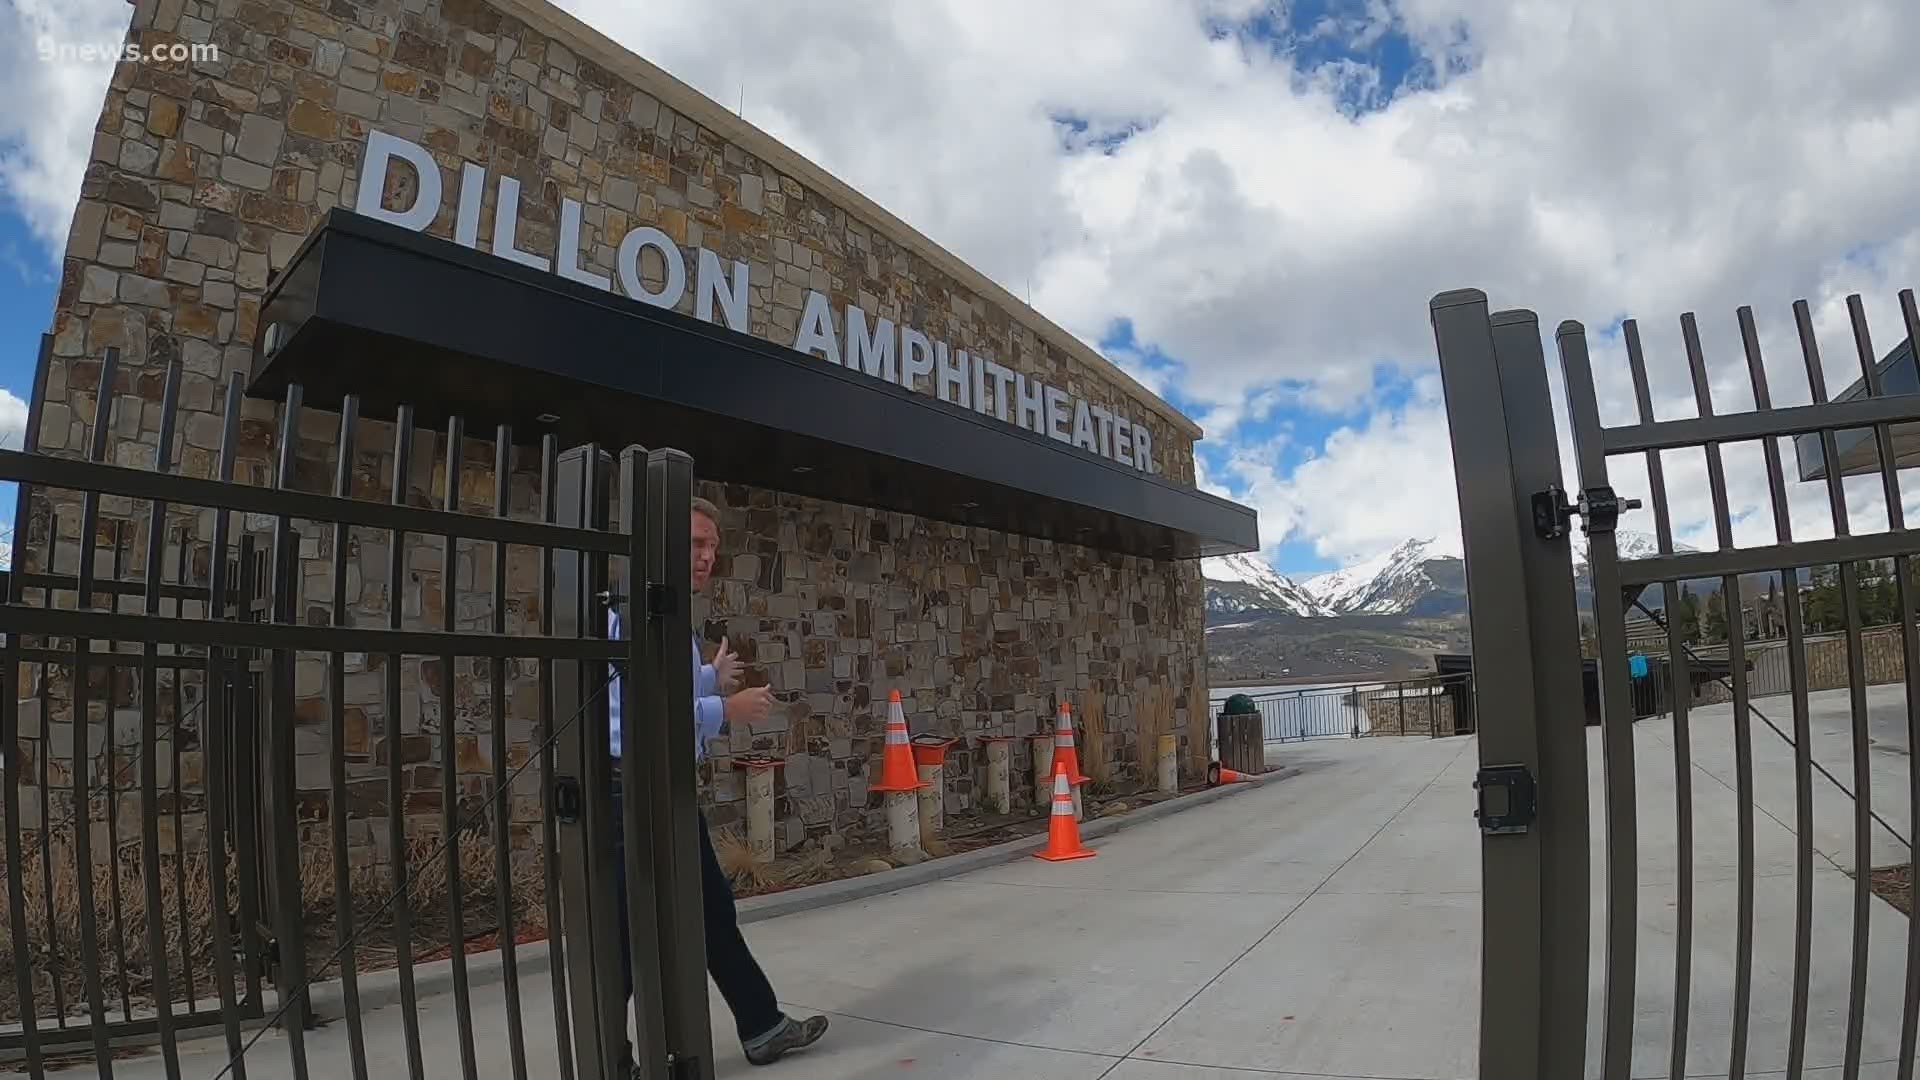 In Dillon, plans for the summer are underway that will include boat rentals at the Dillon Reservoir and a farmers market.